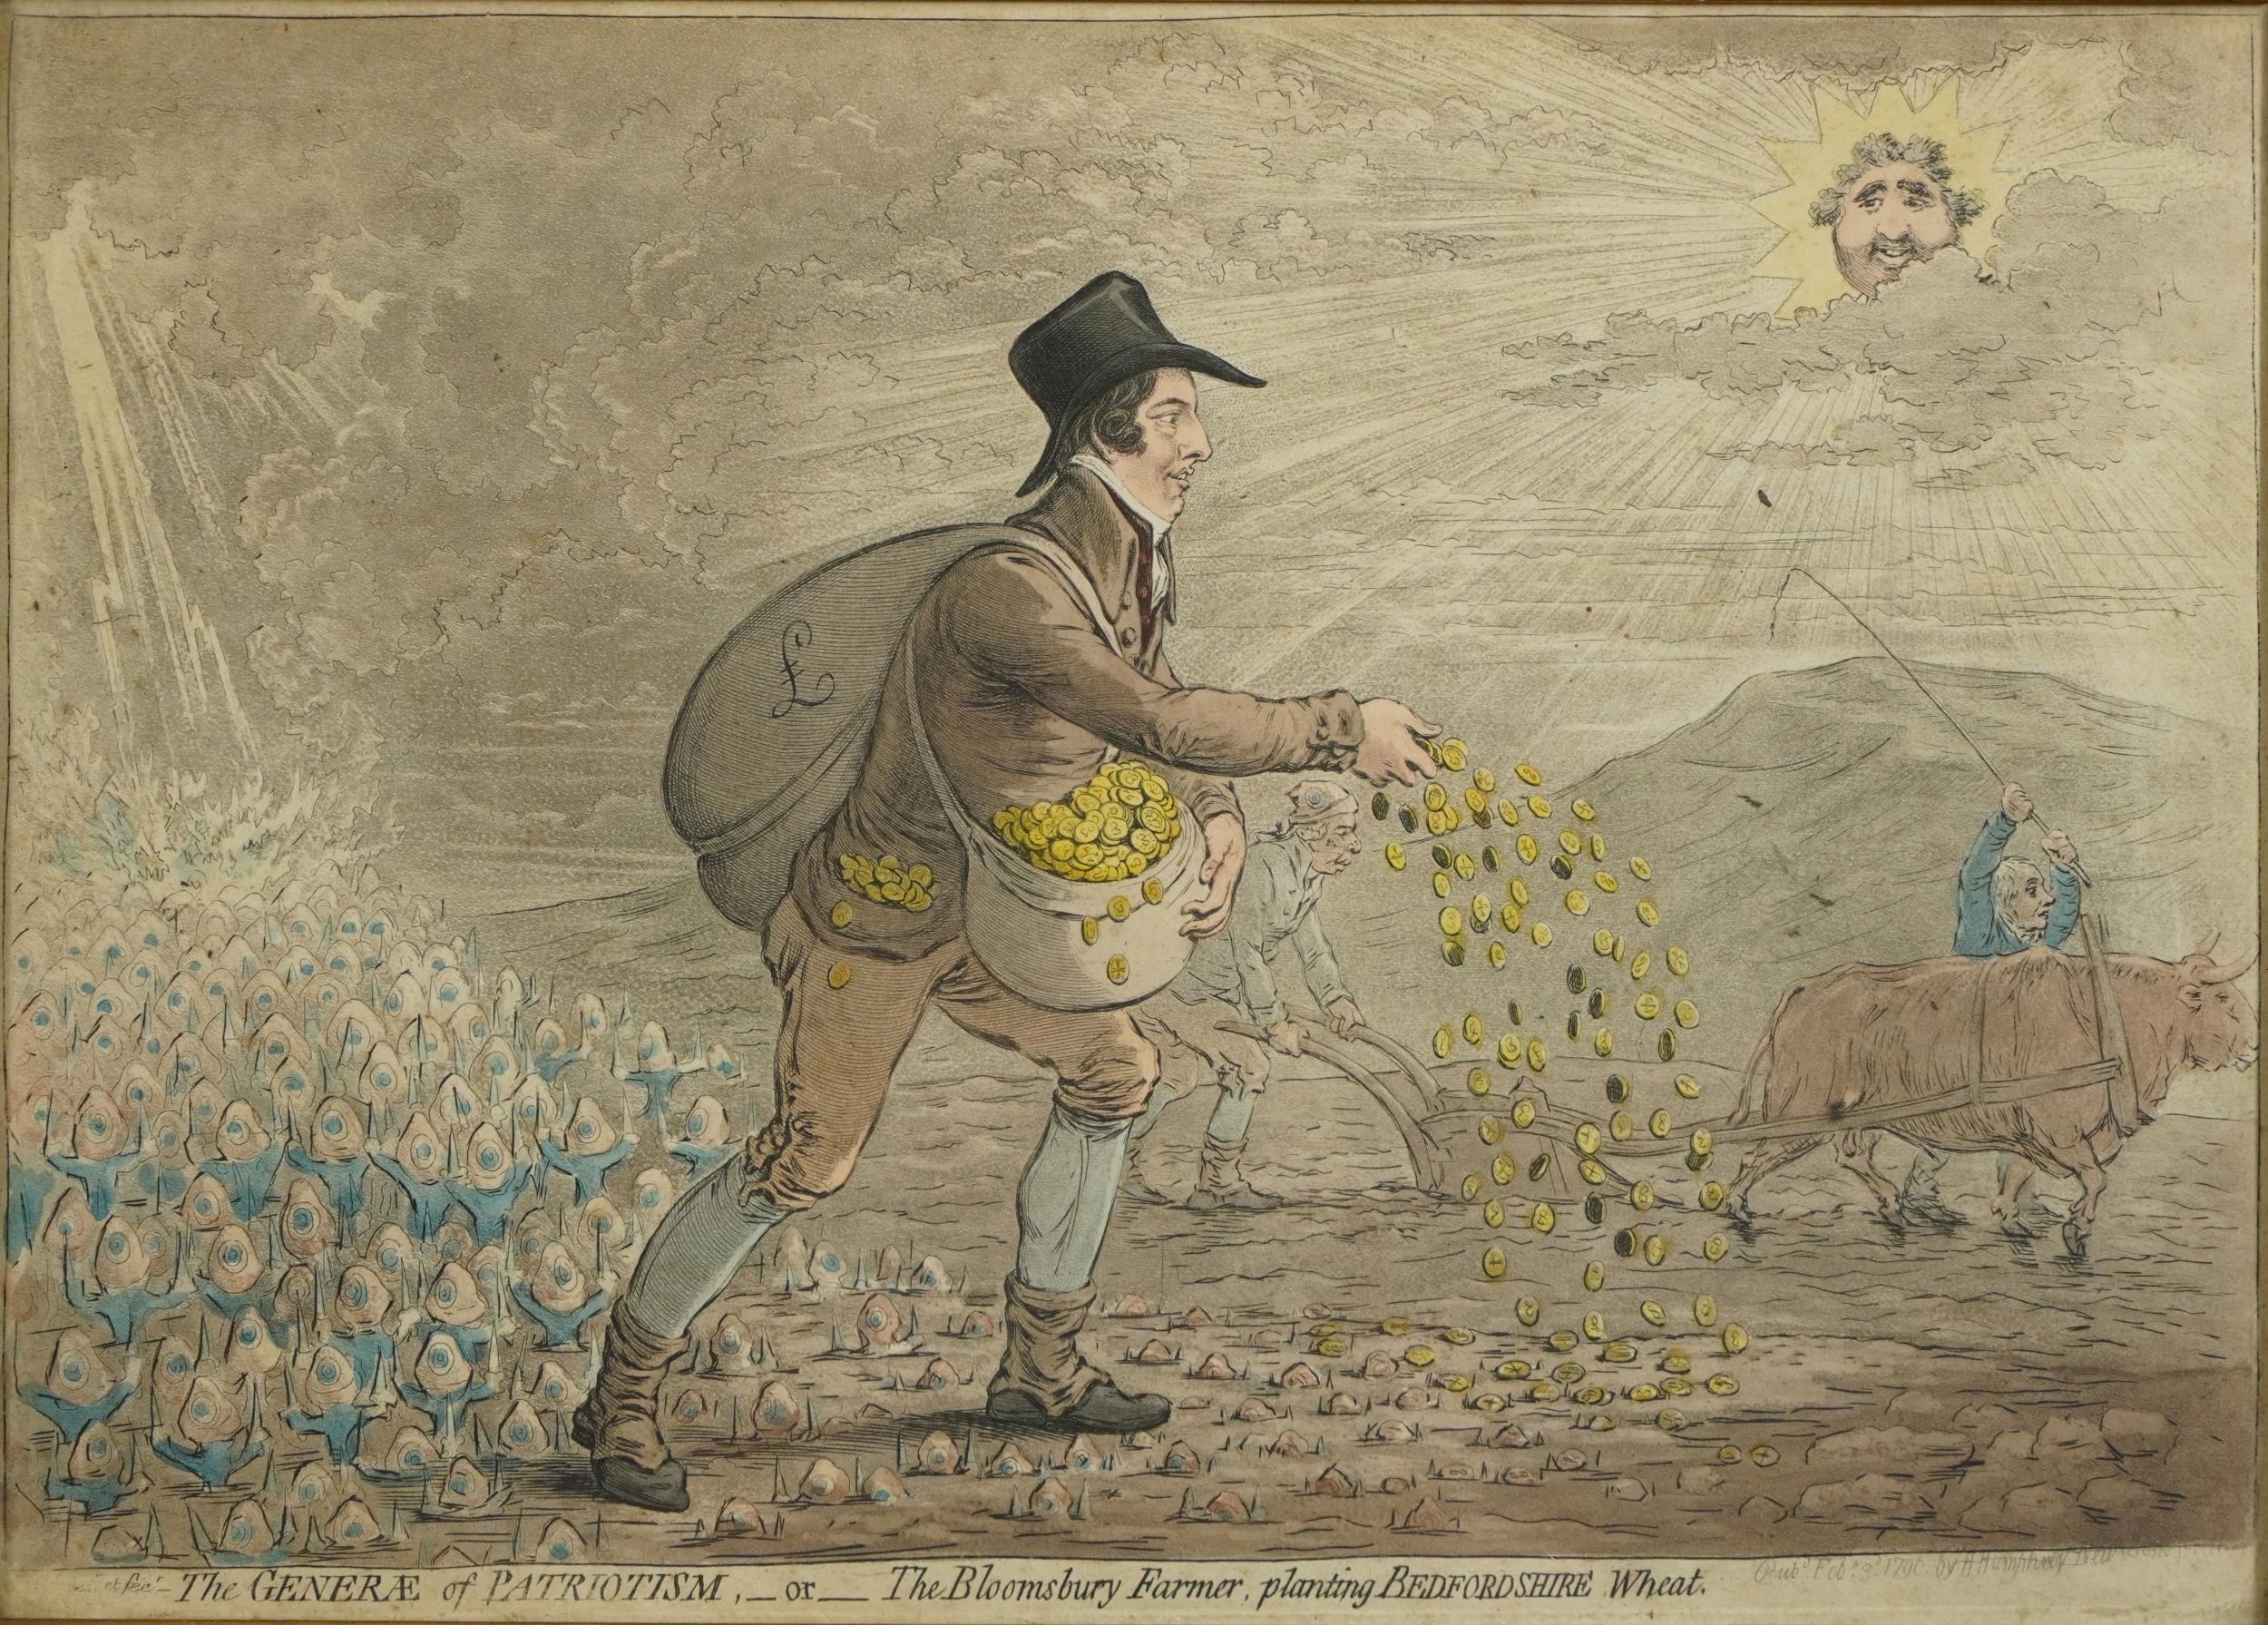 The Generae of Patriotism or The Bloomsbury Farmer planting Bedfordshire Whea by James Gillray